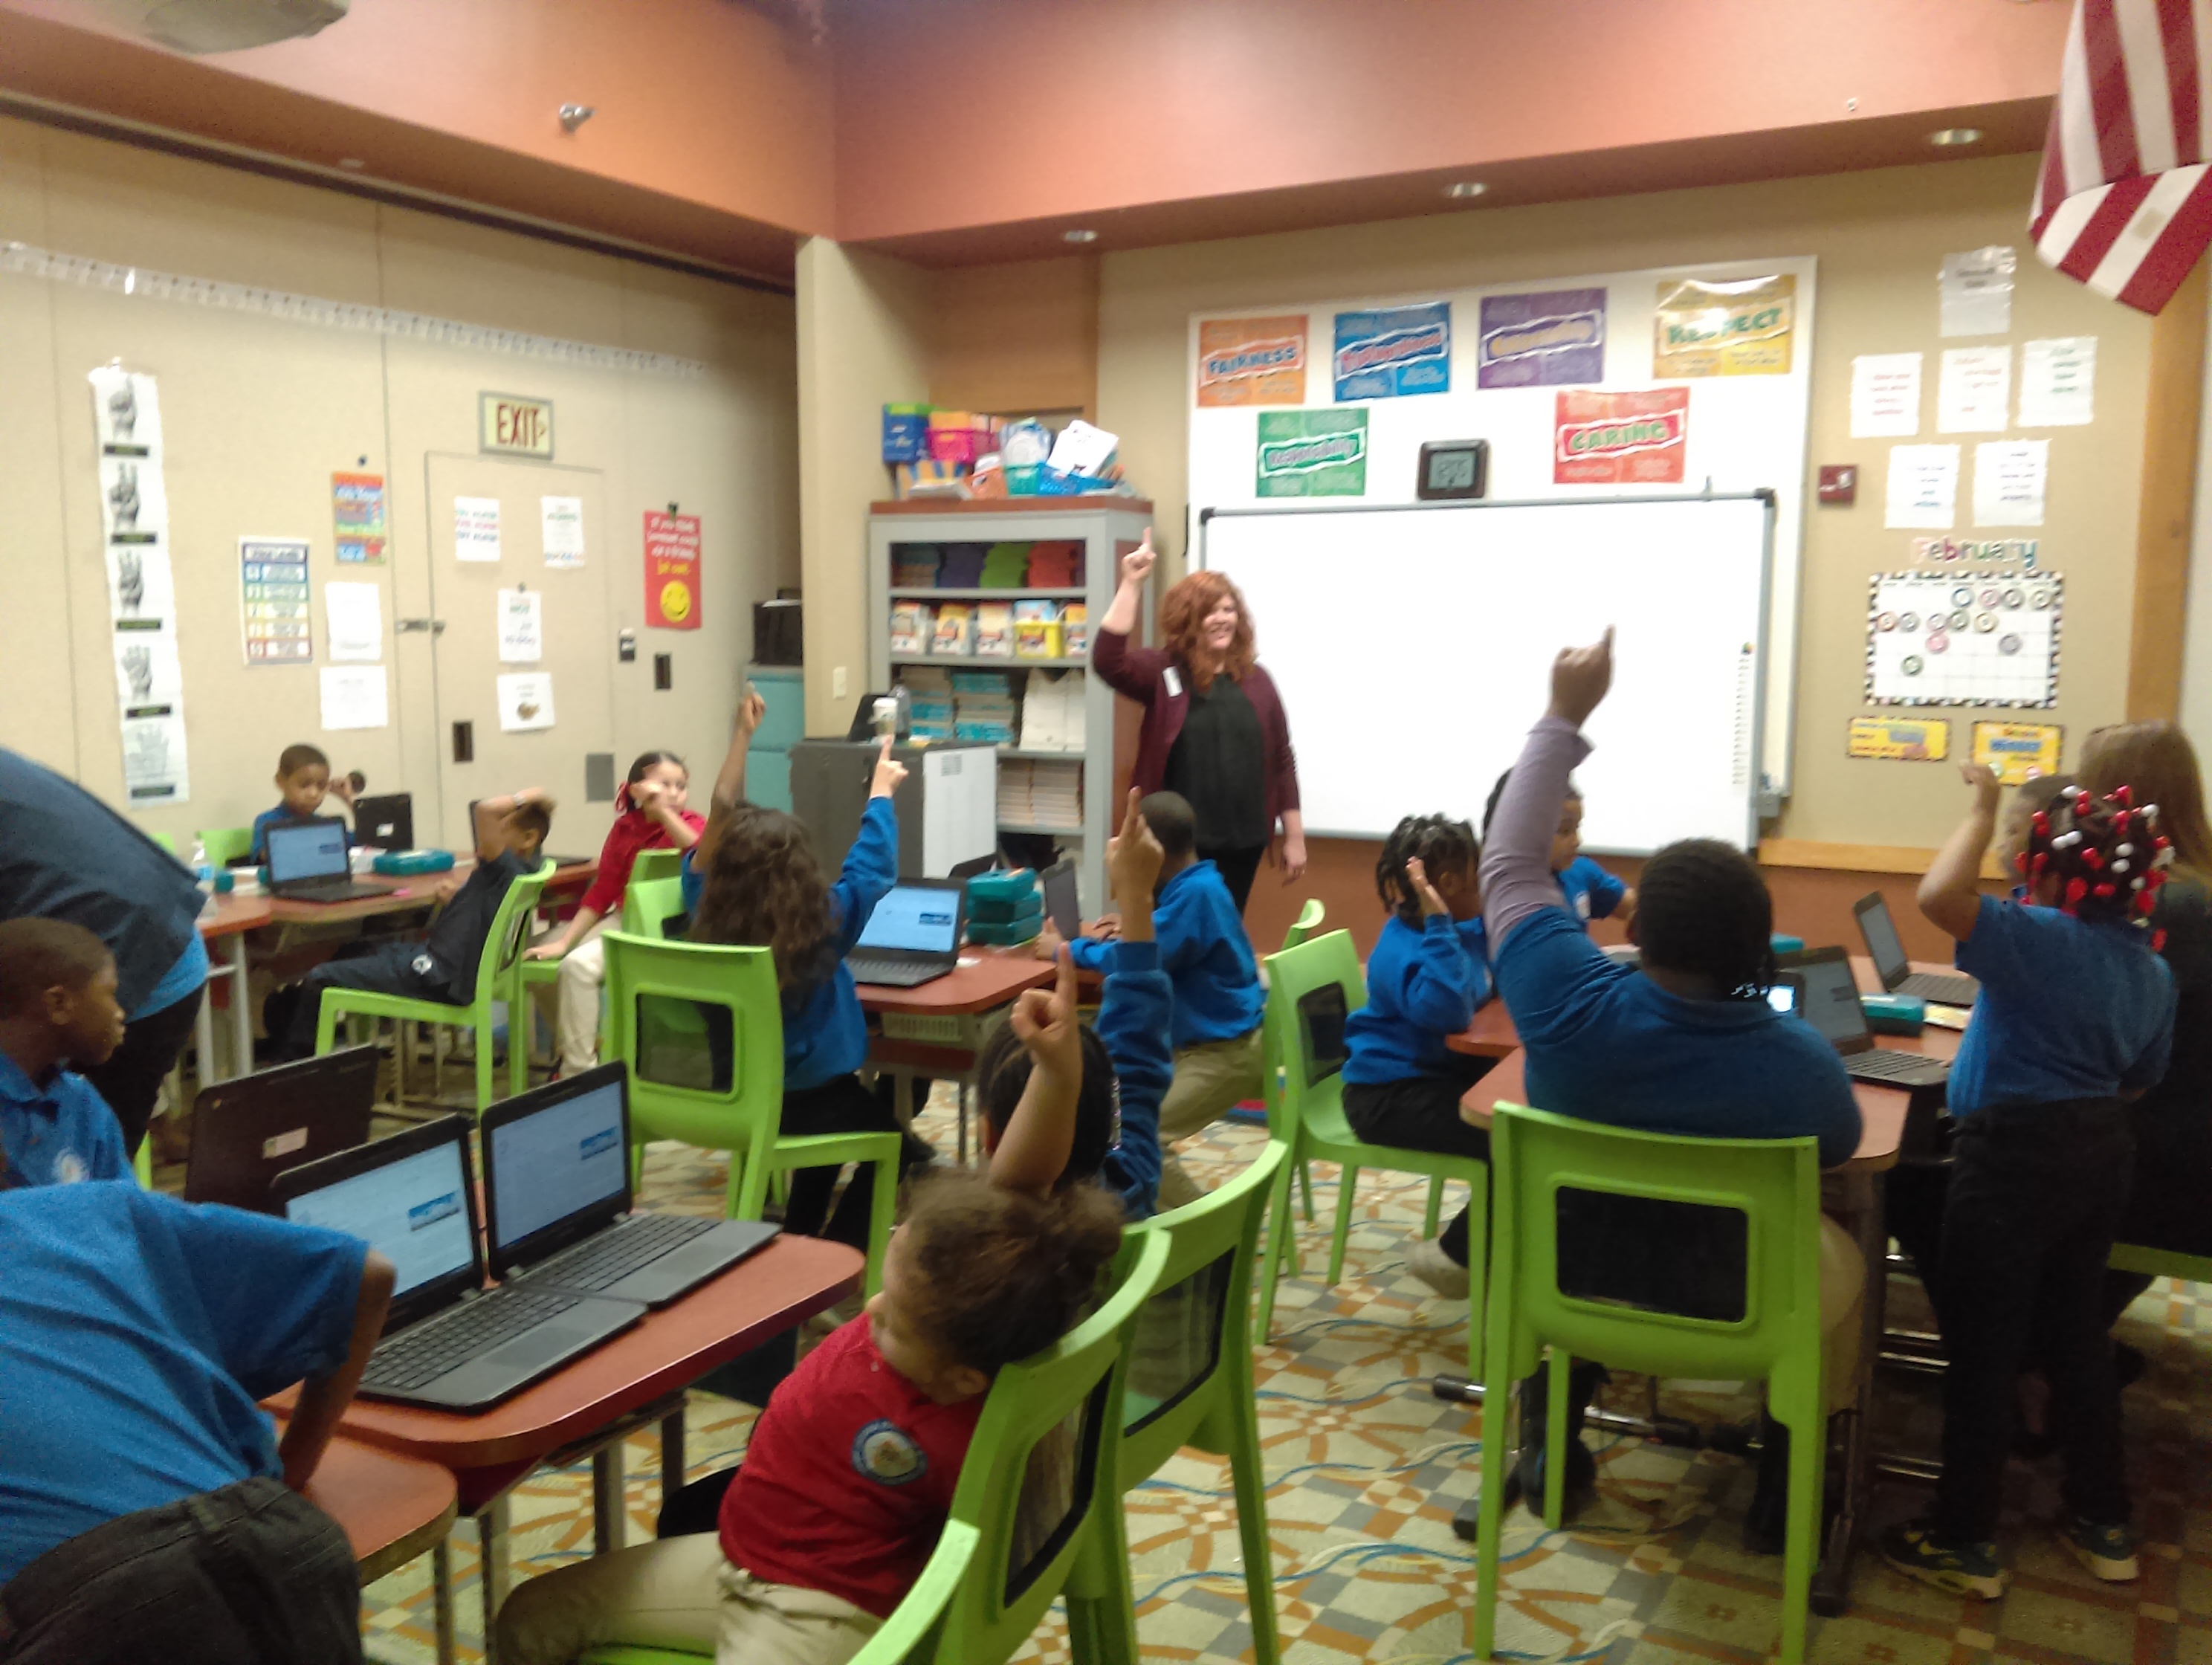 Rachel Herron leading a group of elementary students in a classroom